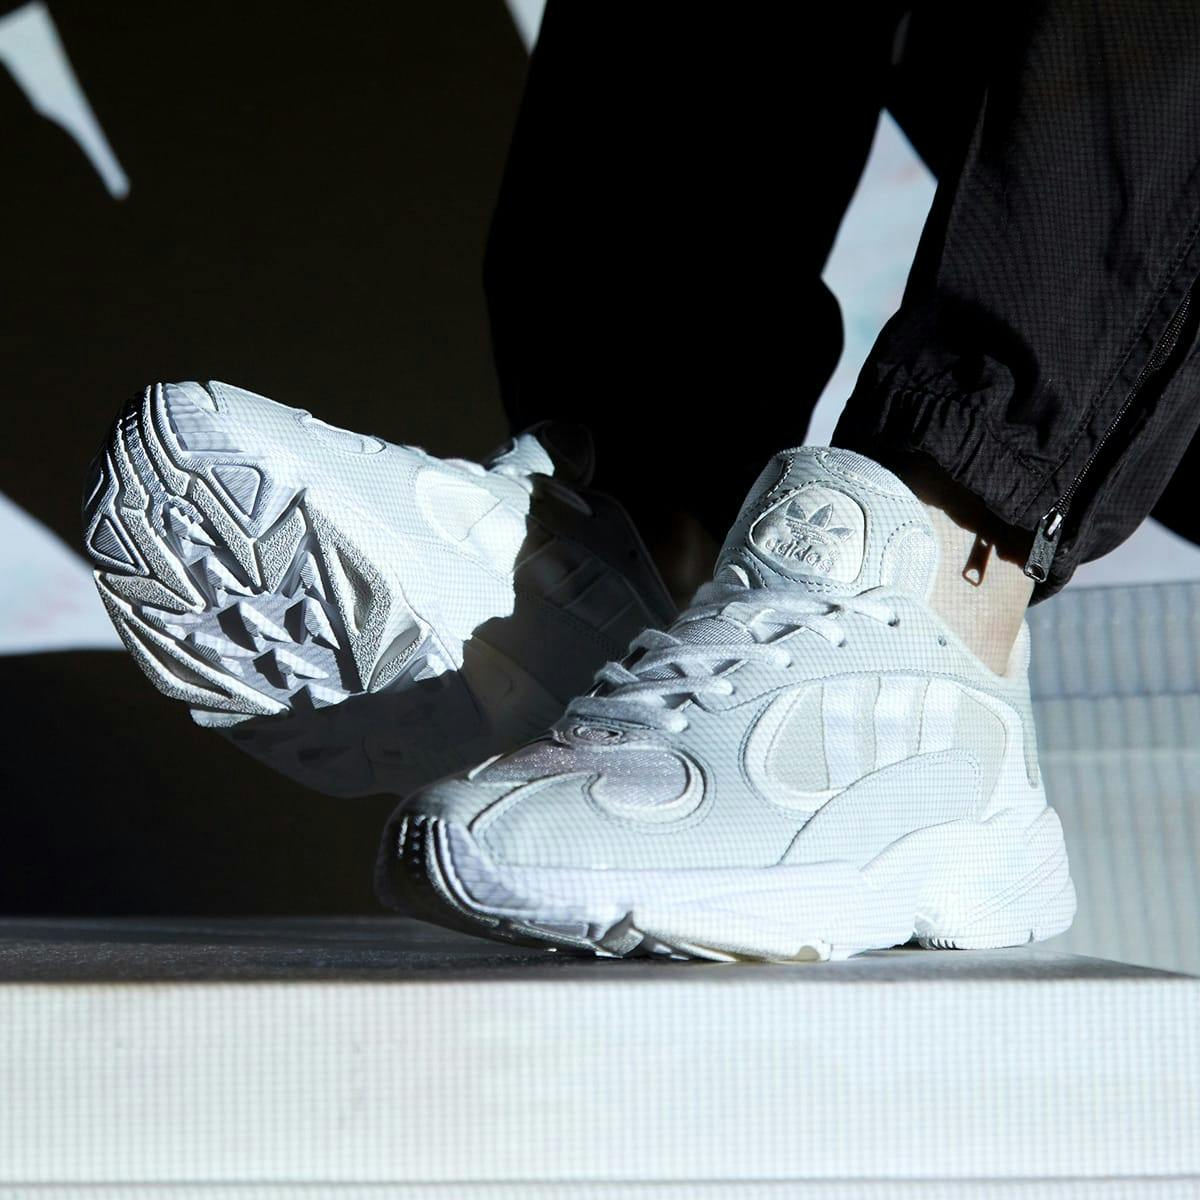 adidas Yung 1 'Cloud White' - Register Now on END. (US) Launches | END. (US)